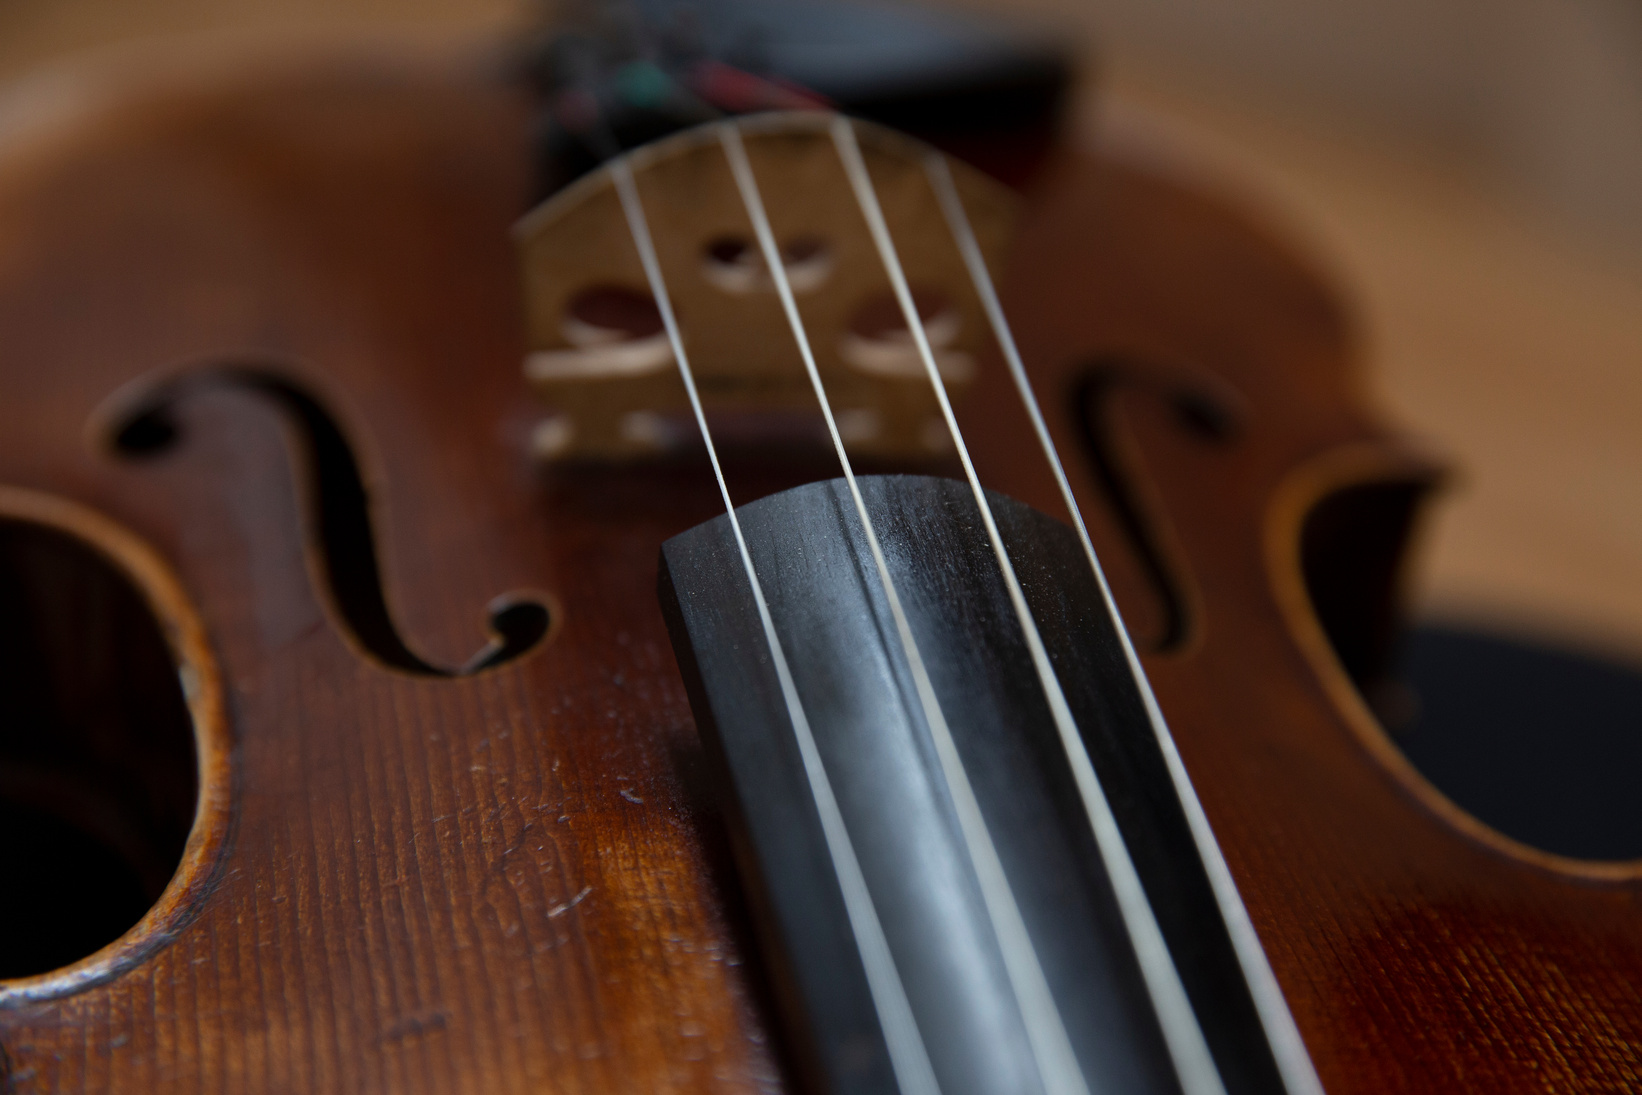 Instrument and microphone settings for string quartet production